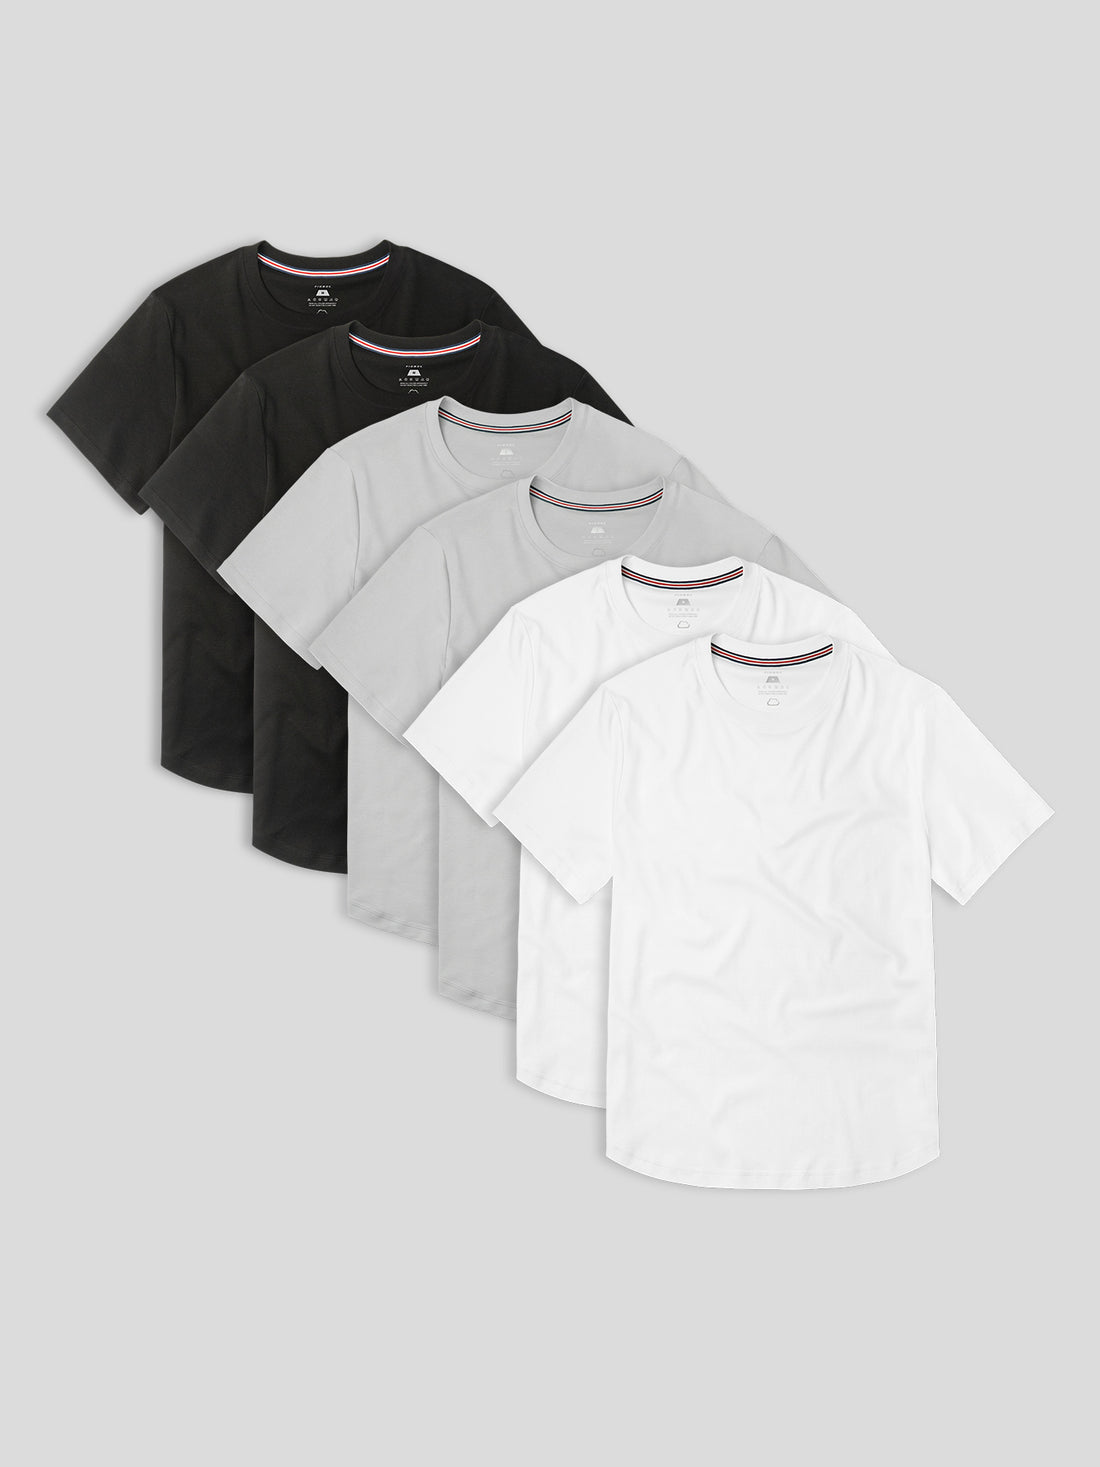 CloudWear Classic Fit Tee Multicolor 6-Pack